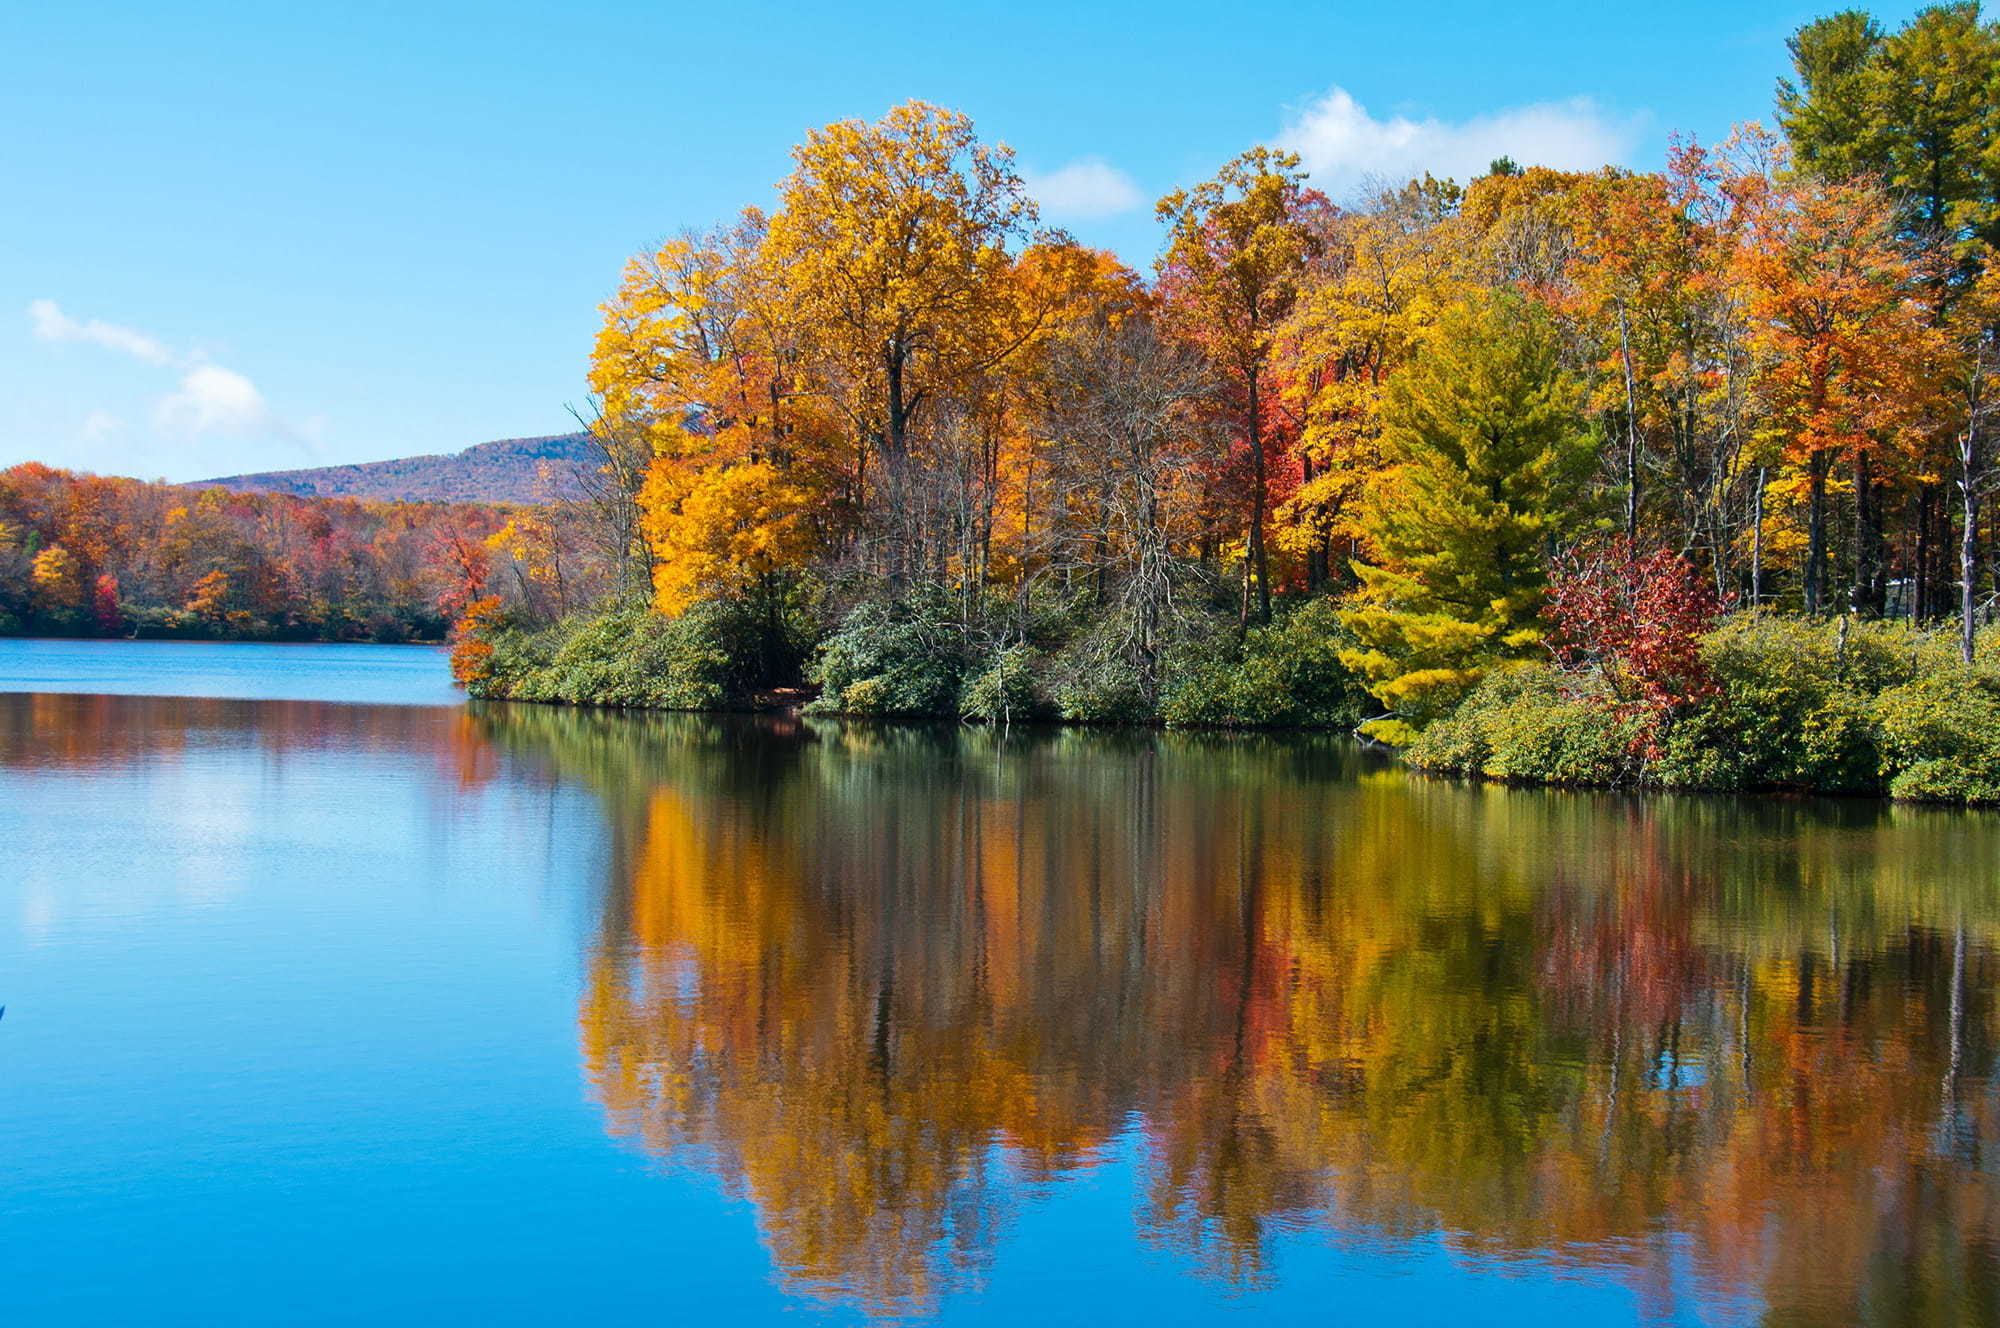 Fall foliage over a lake in North Carolina with mountains in background